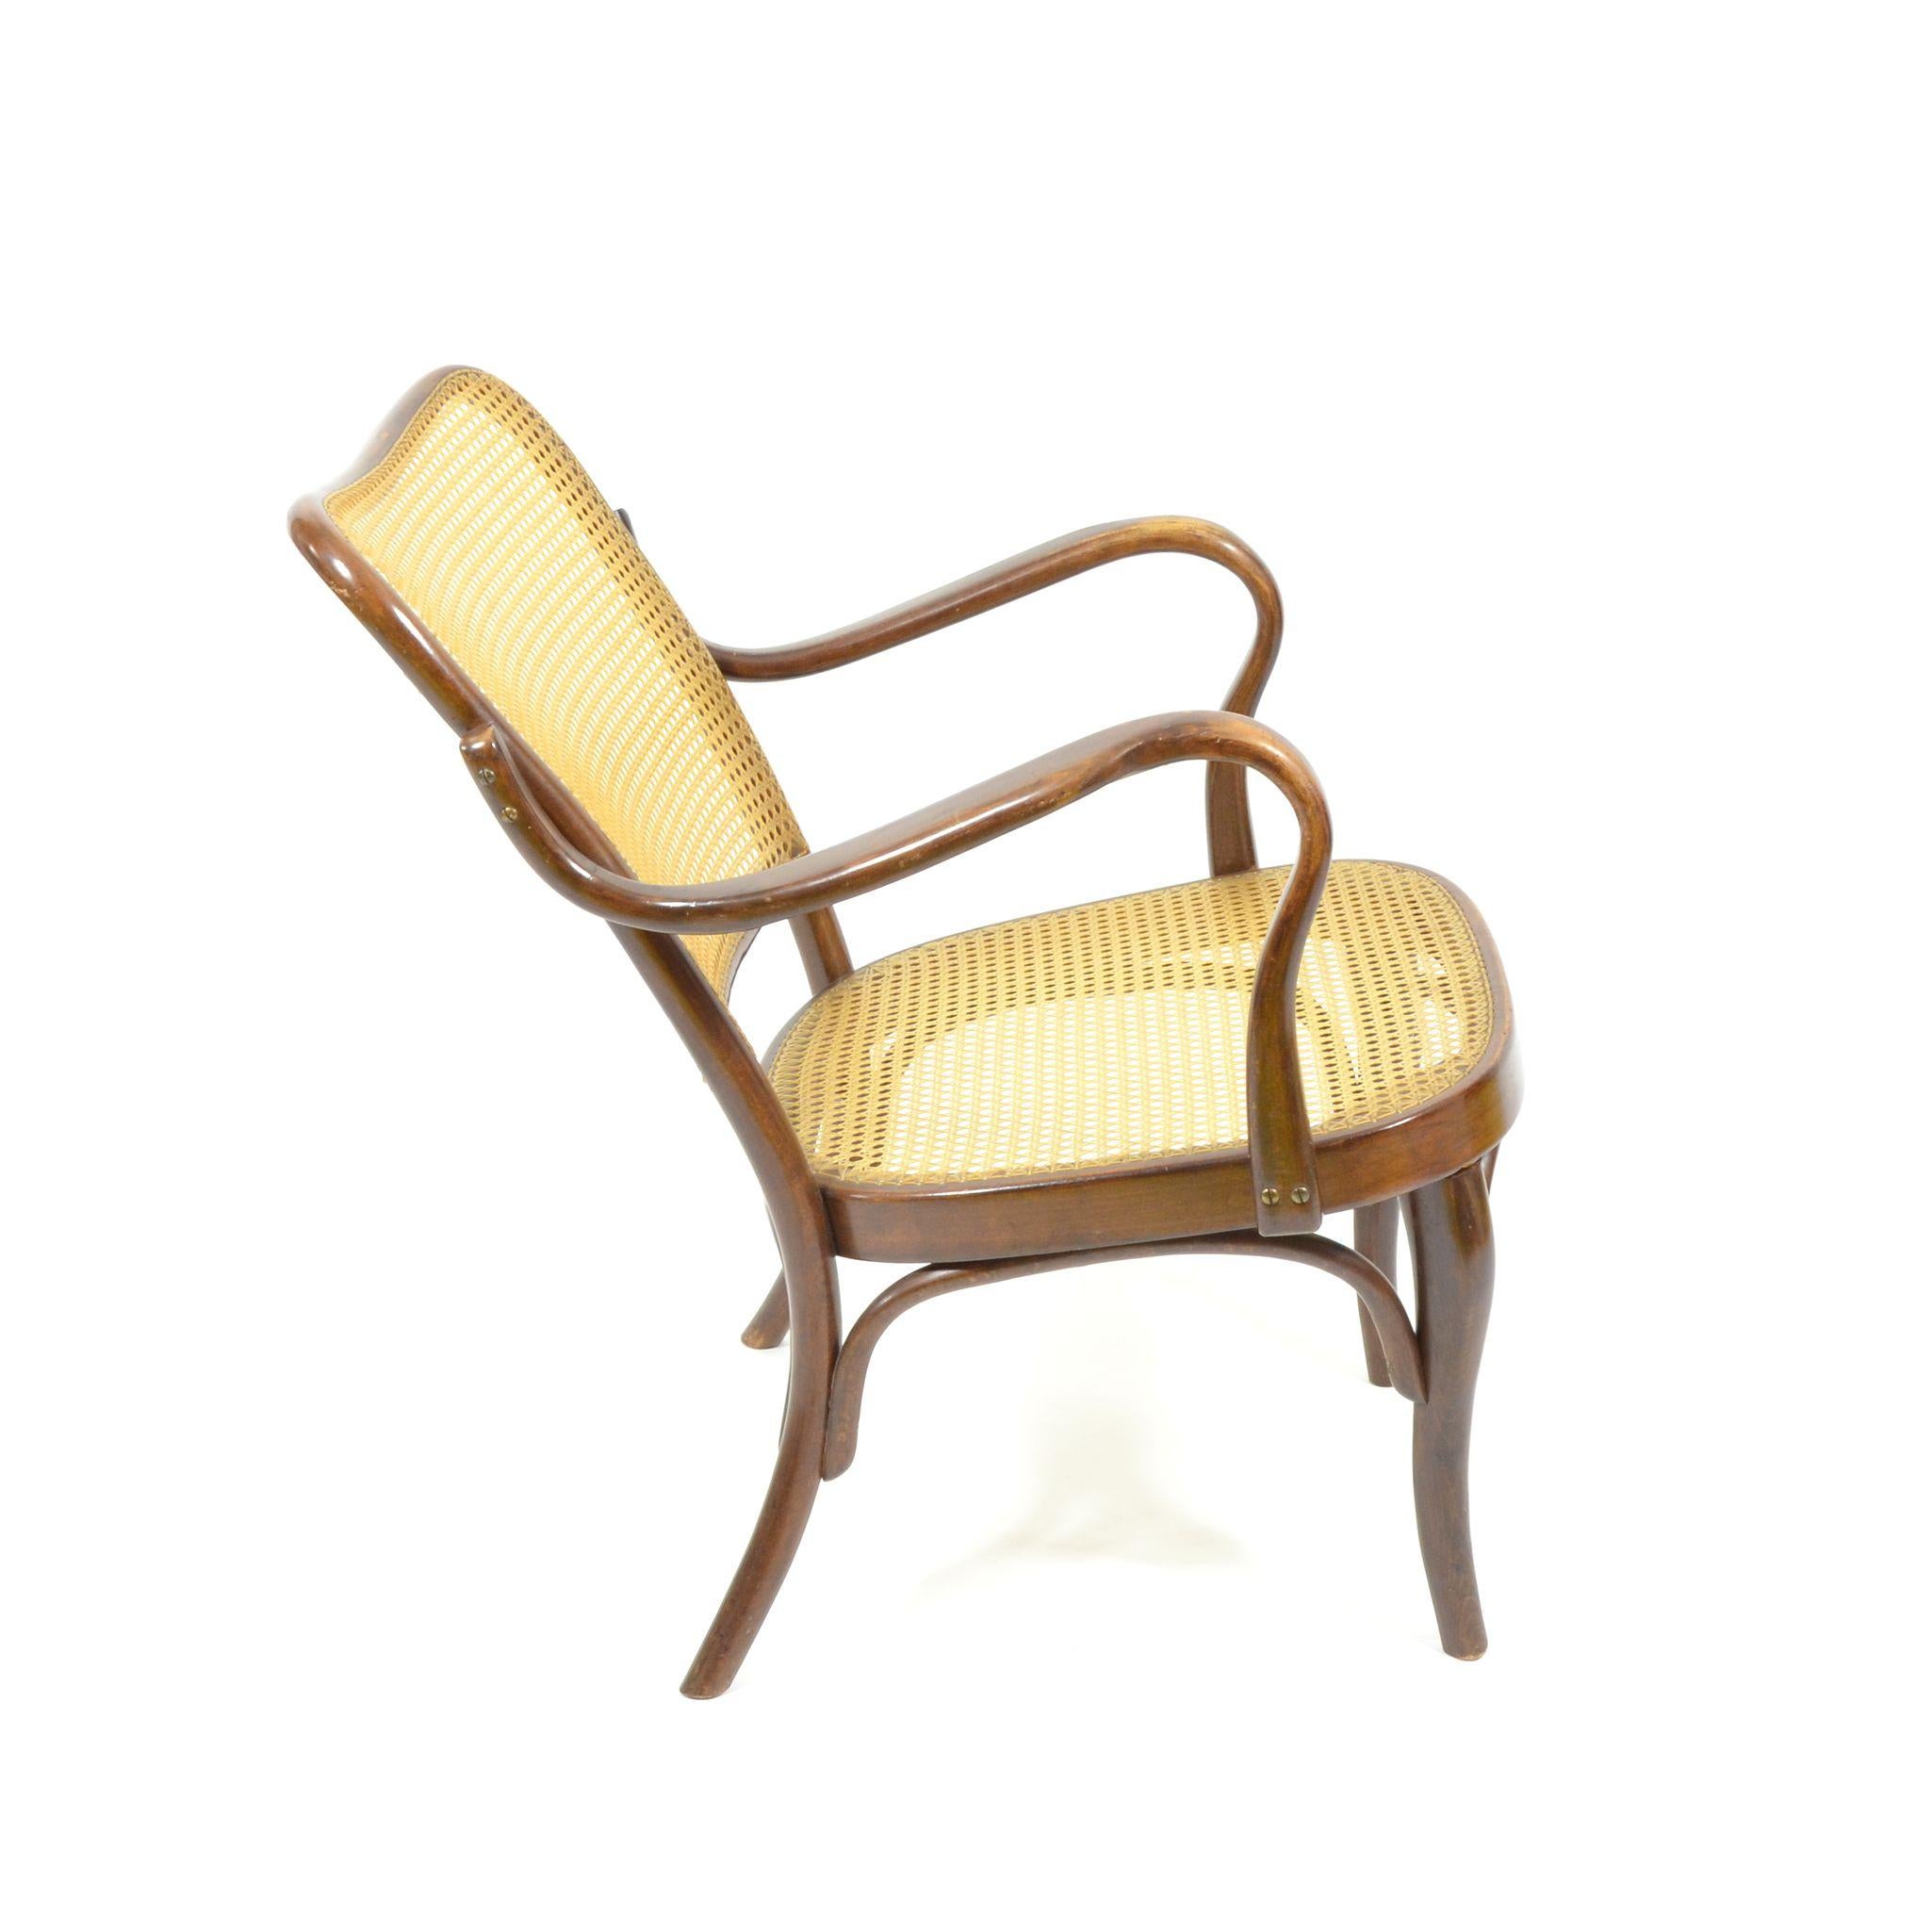 Thonet Armchair by Josef Frank, Austria, circa 1930 In Good Condition For Sale In Zbiroh, CZ